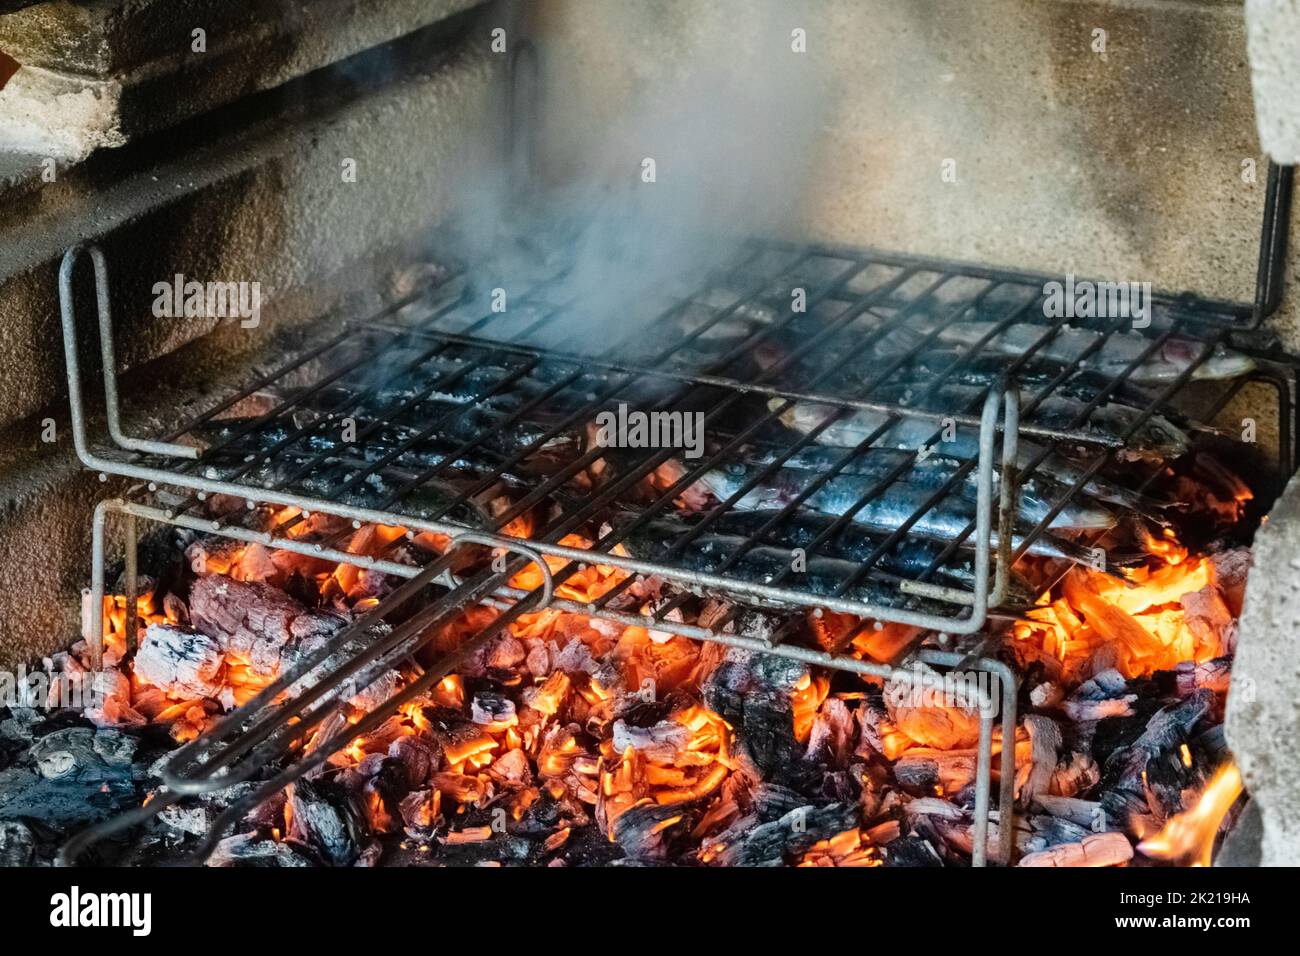 Grilling sardines over the barbecue fire Stock Photo